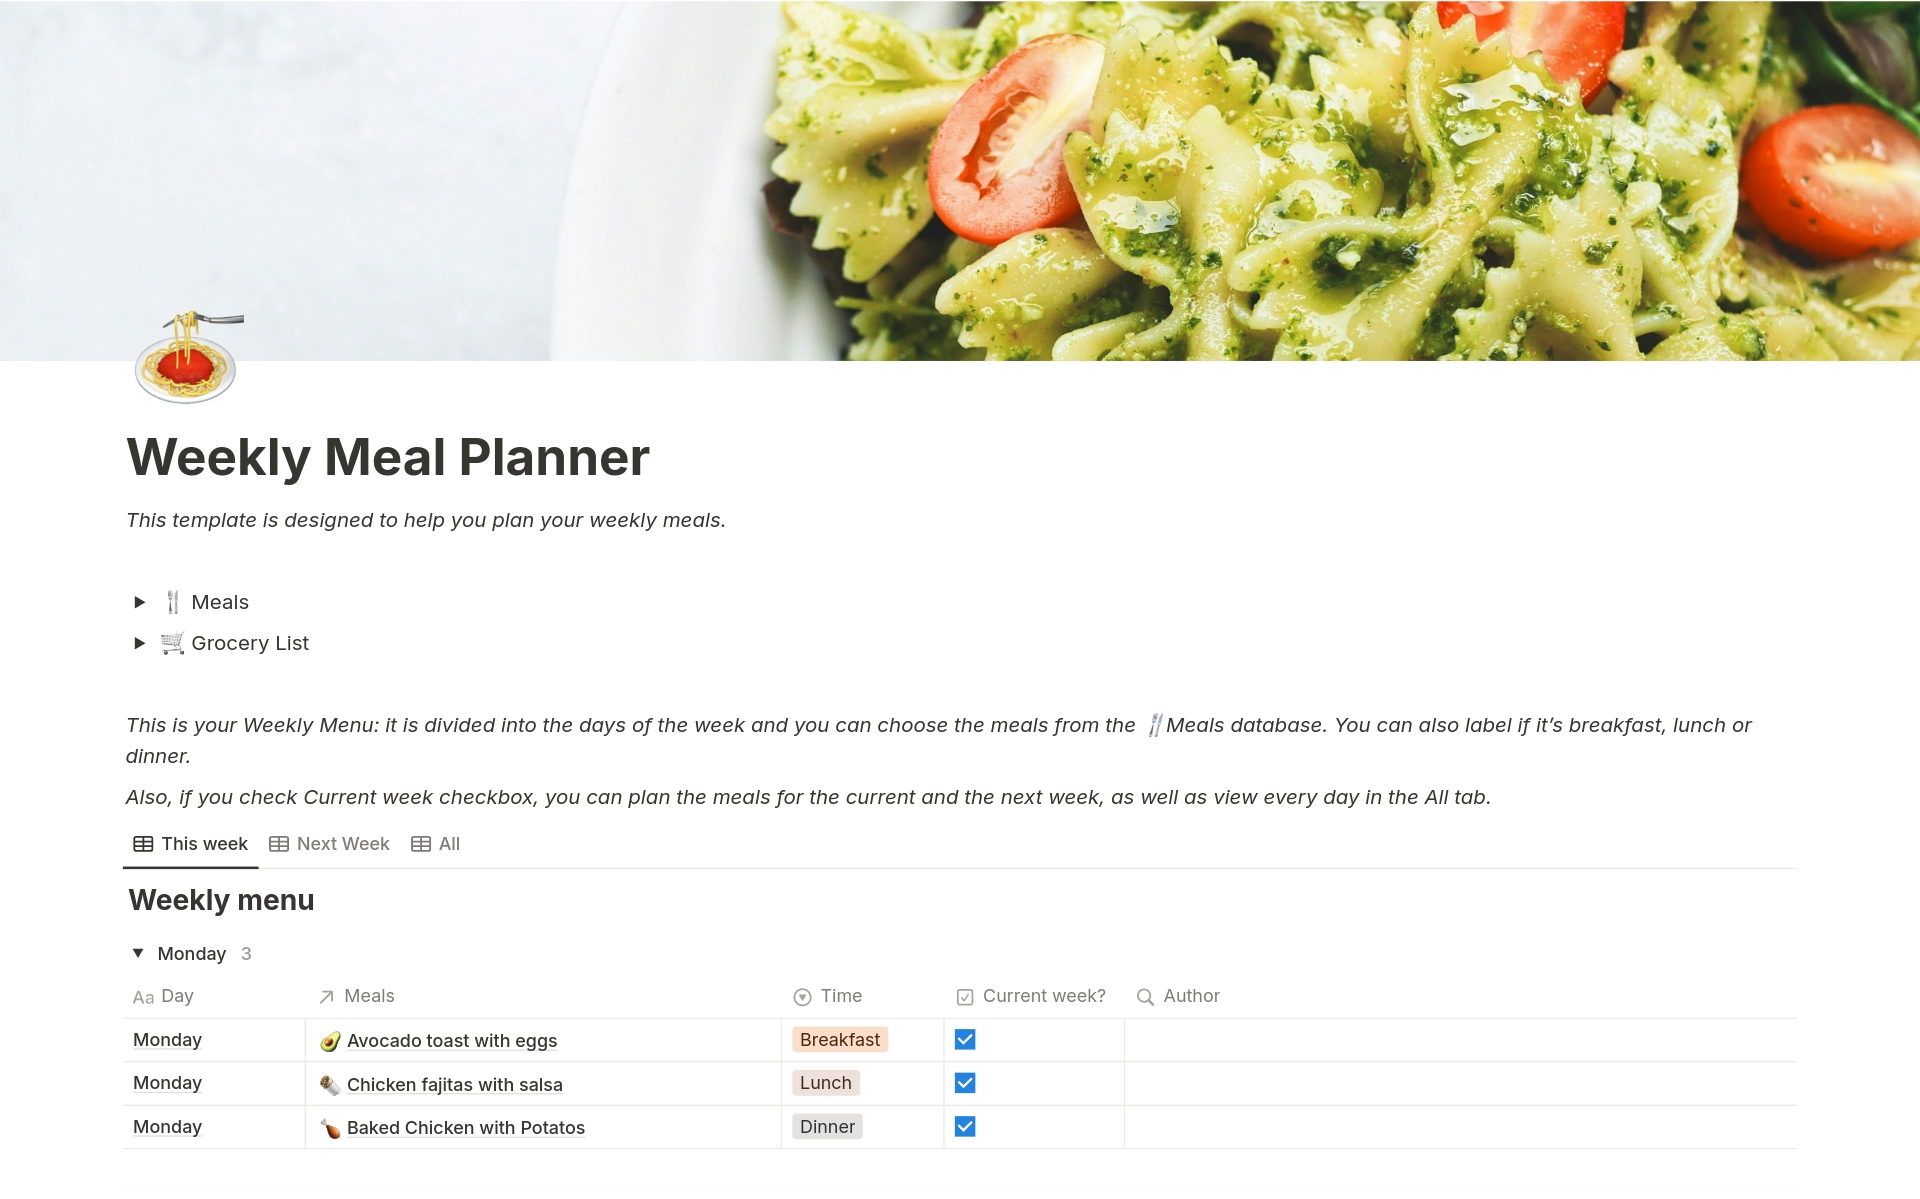 This template is designed to help you plan your weekly meals!